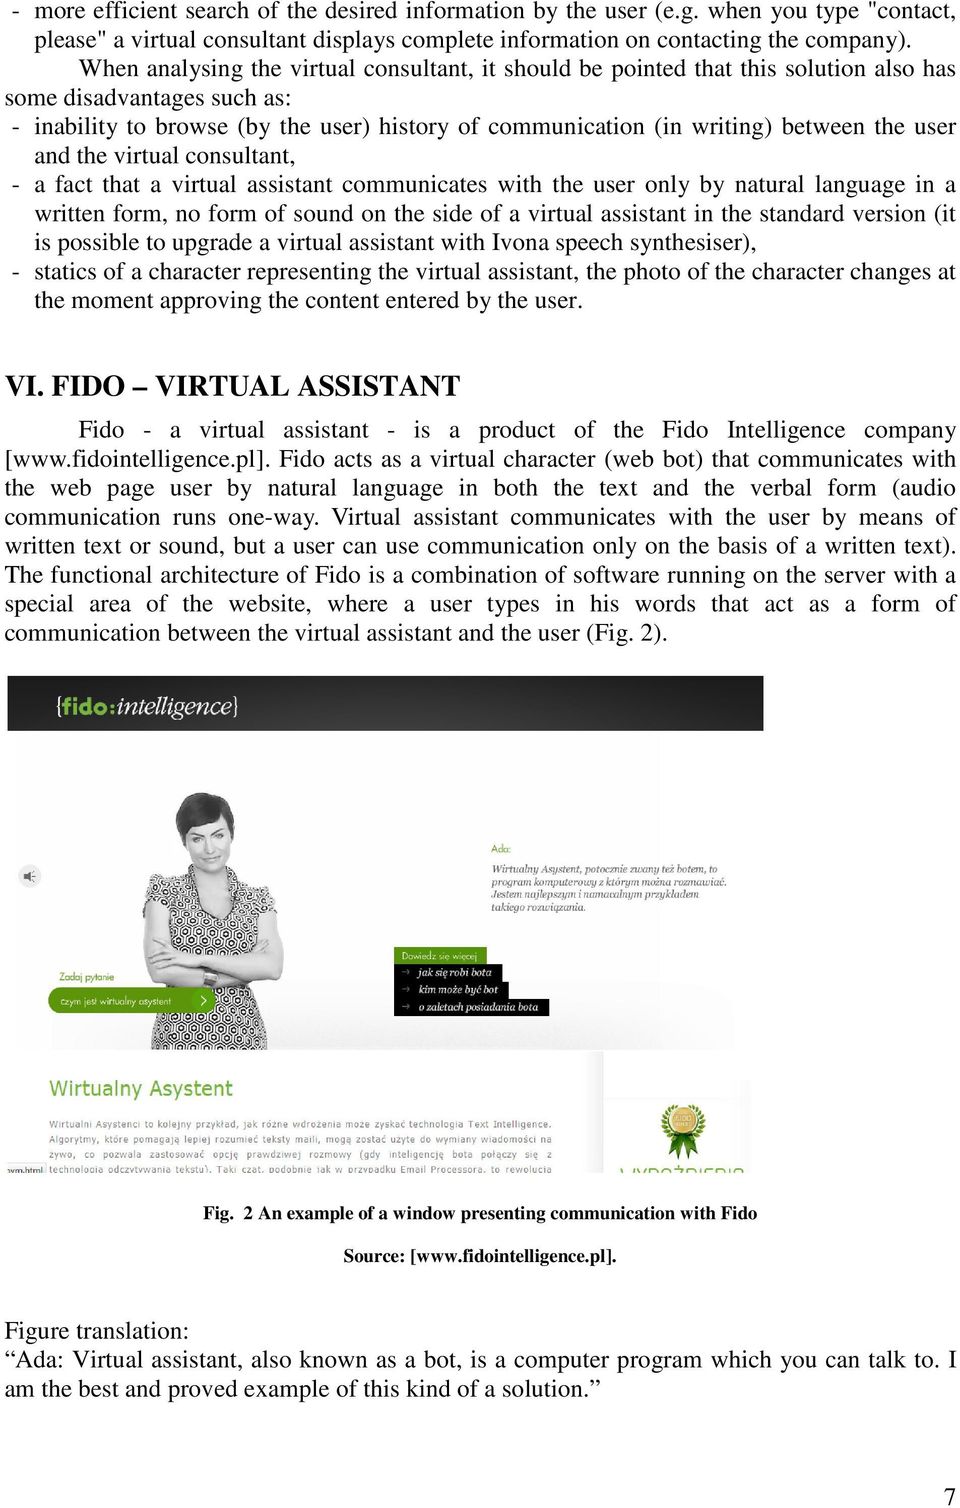 the user and the virtual consultant, - a fact that a virtual assistant communicates with the user only by natural language in a written form, no form of sound on the side of a virtual assistant in